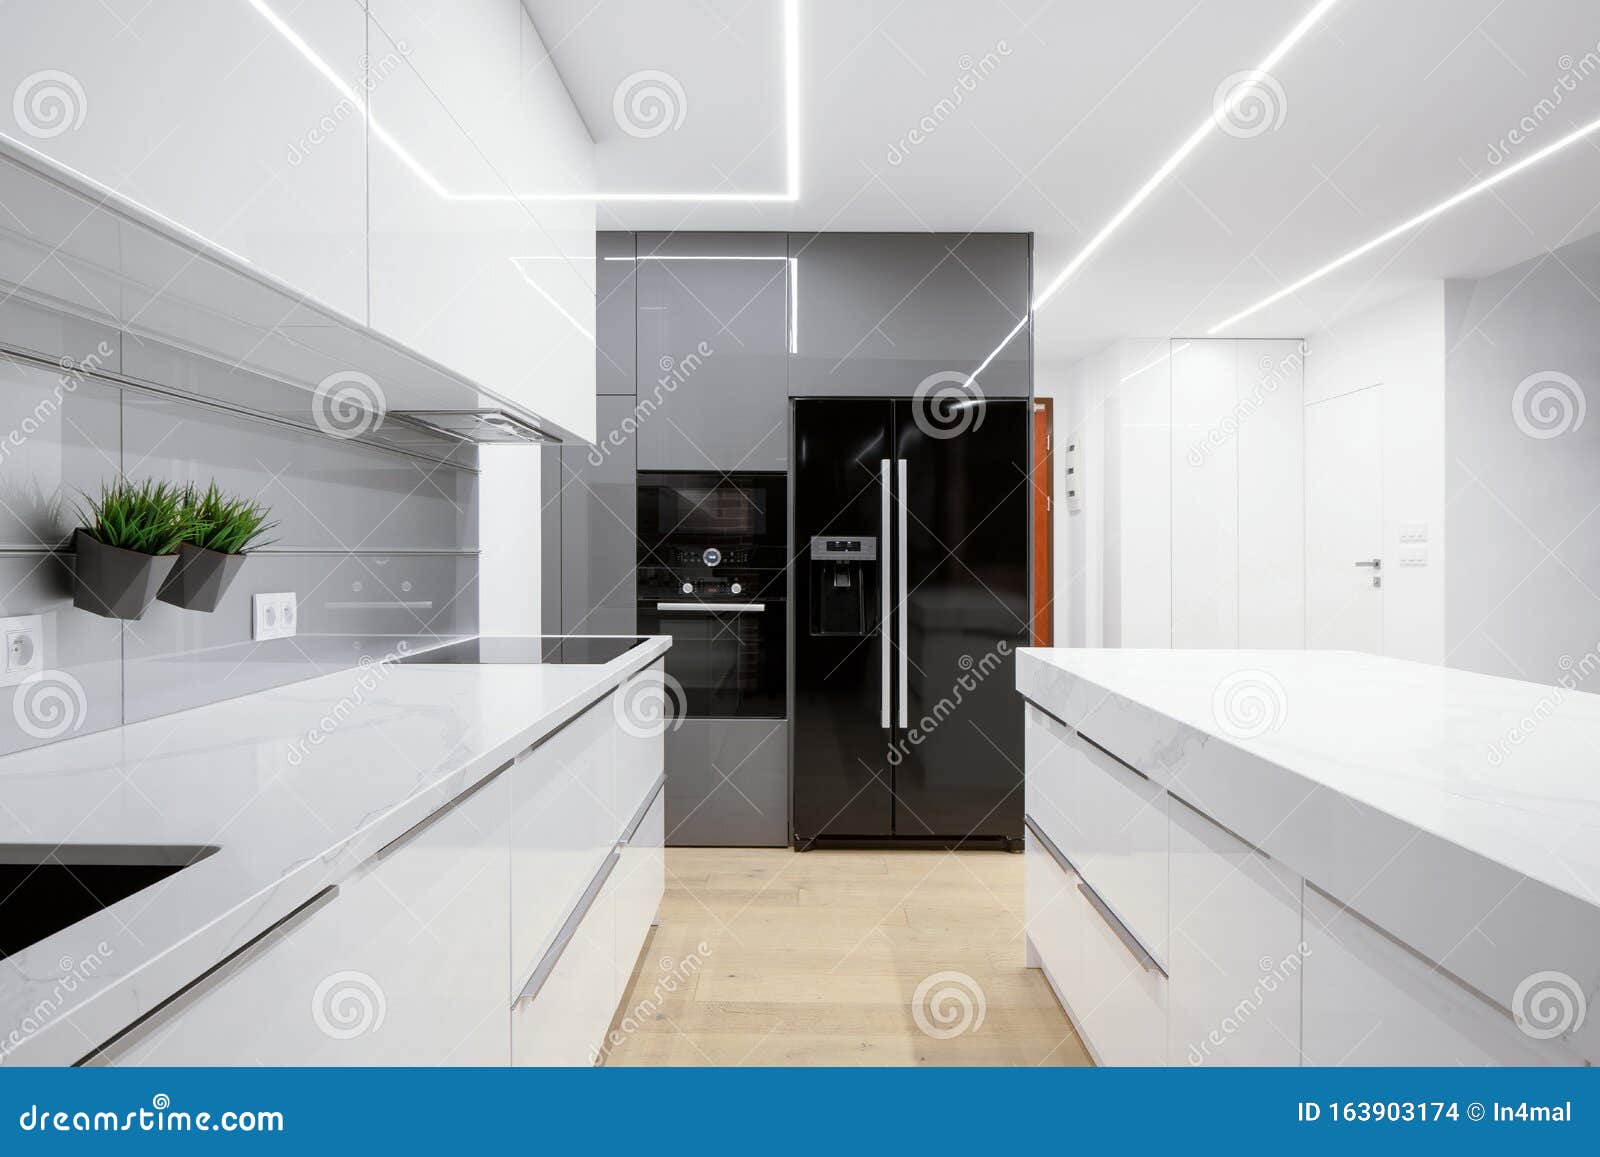 Kitchen With Led Ceiling Lights Stock Photo Image Of Dwelling